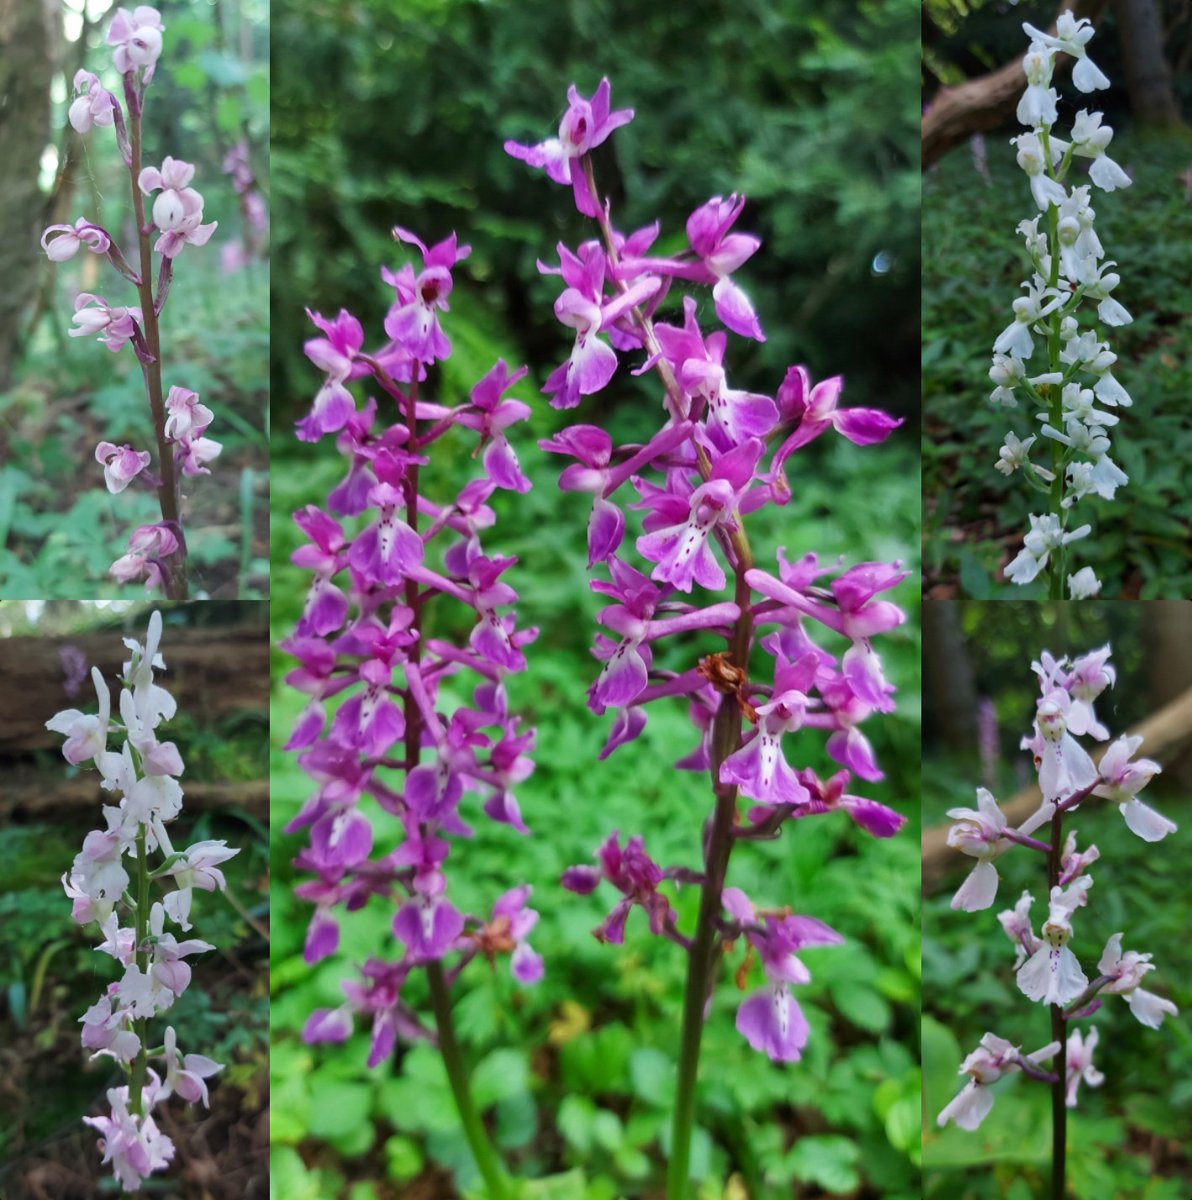 Early Purple Orchids from Kent today including peloric and alba.